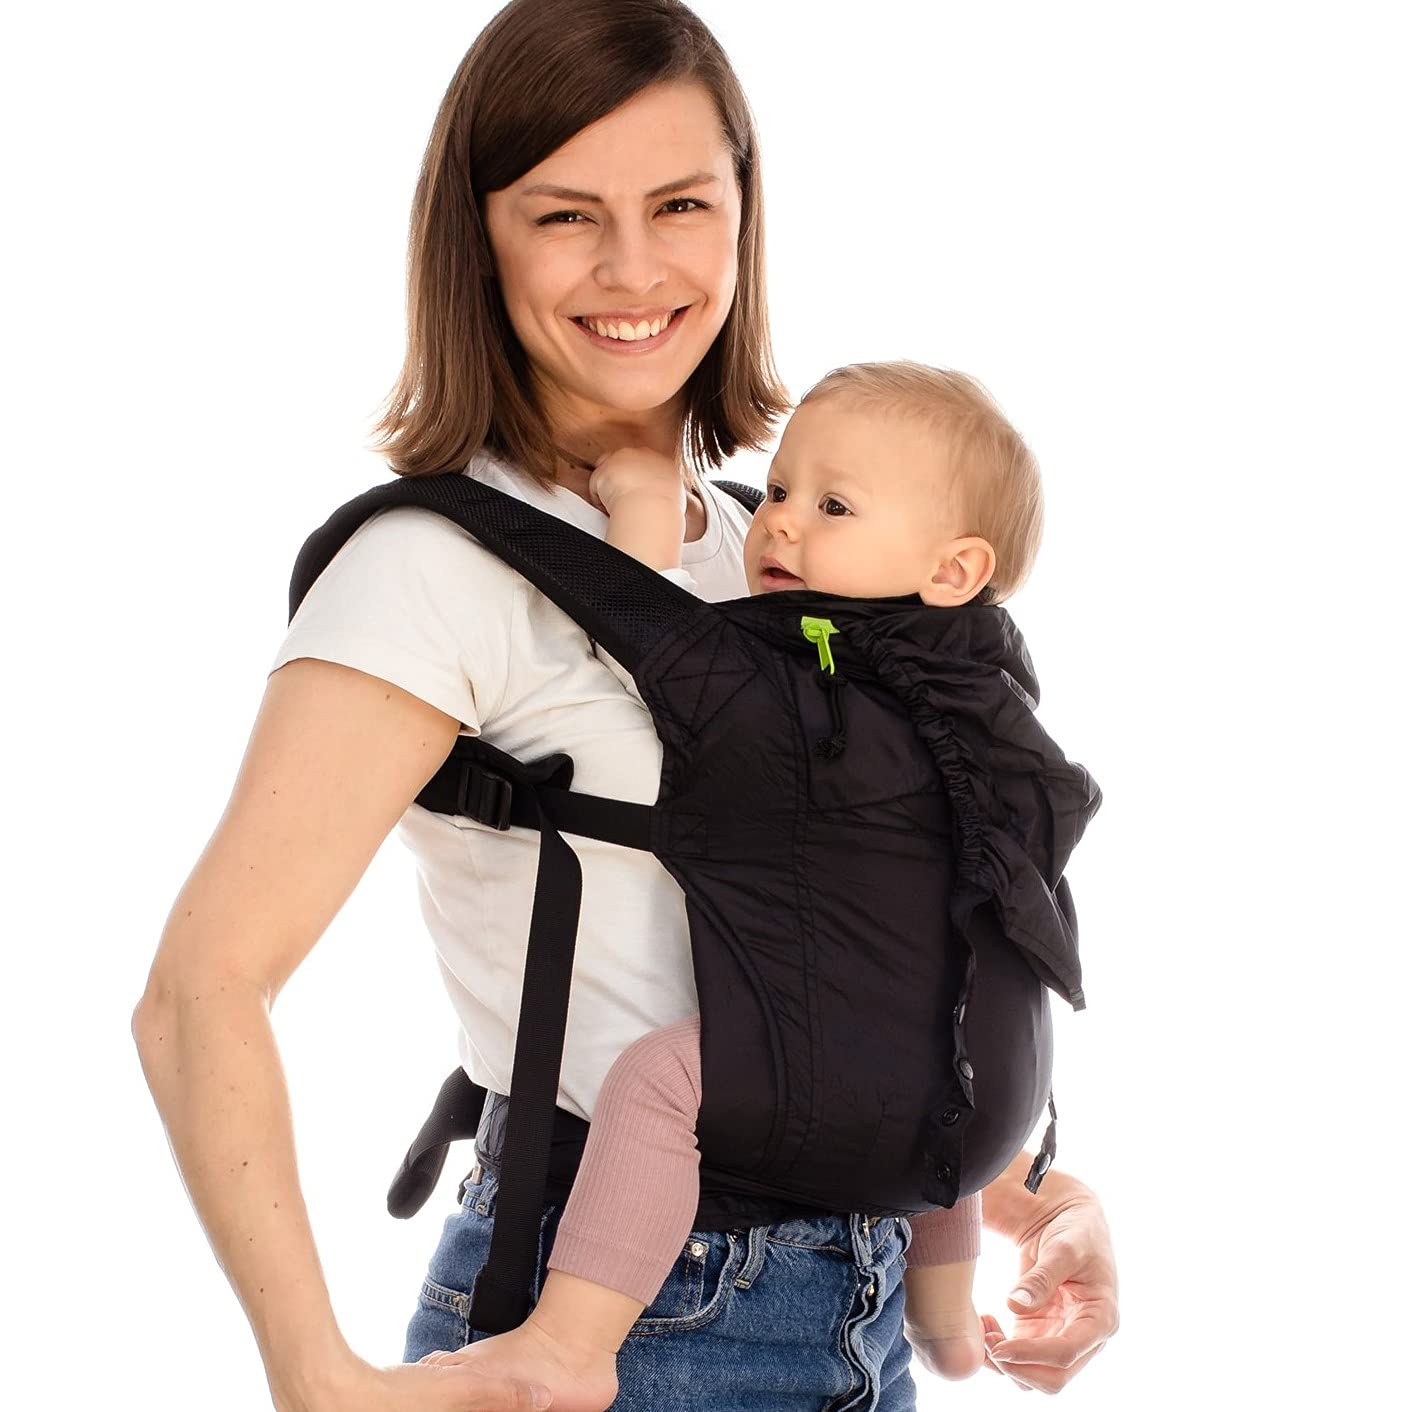 Boba Air Grey II - Lightweight Travel Baby Carrier for Large Children, Stomach and Back Carriers, Breathable Mesh Shoulder Straps, Padded Leg Holes for Better Grip